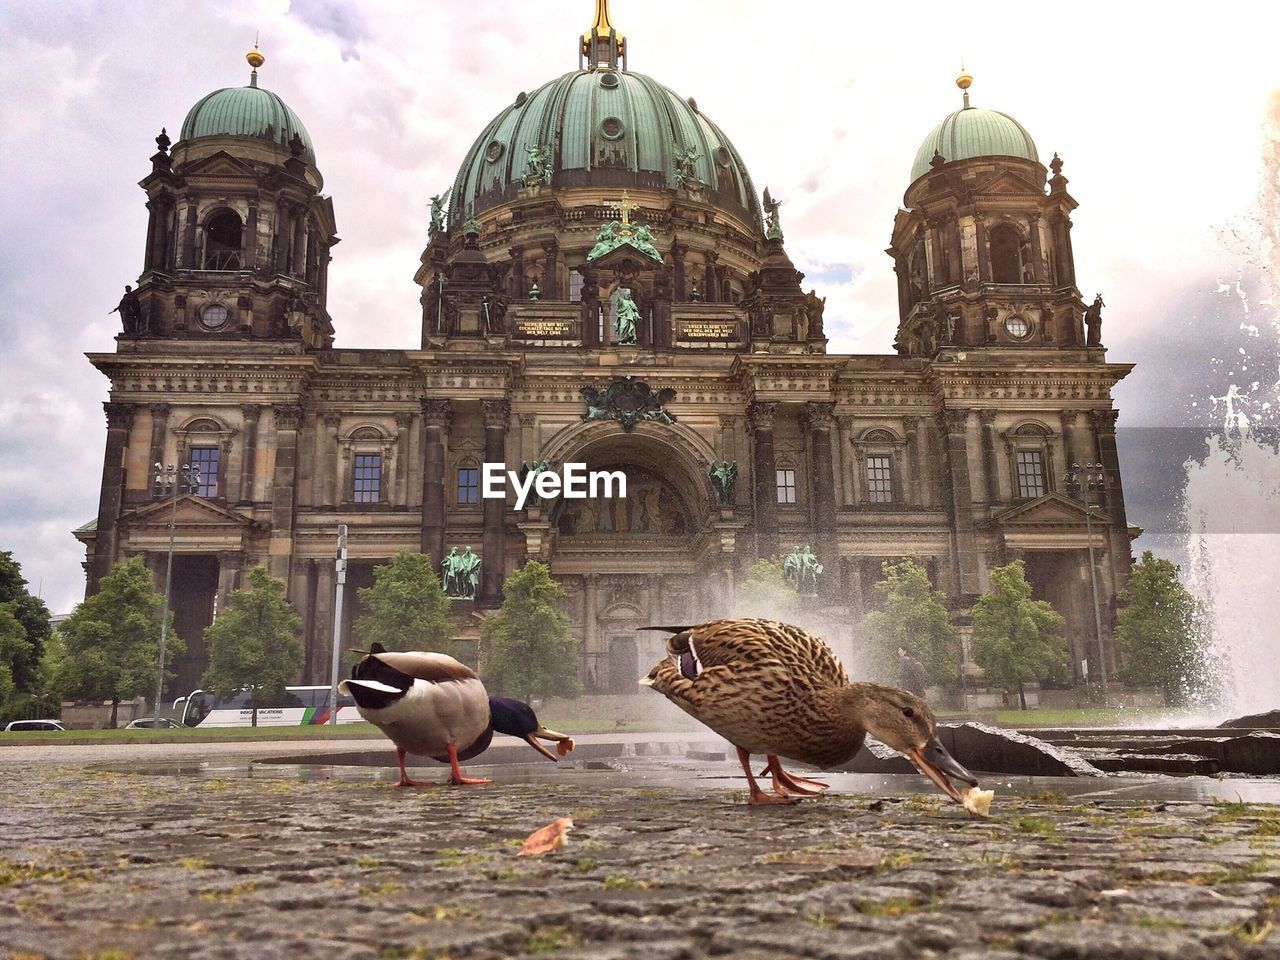 Ducks feeding on street in front of berlin cathedral